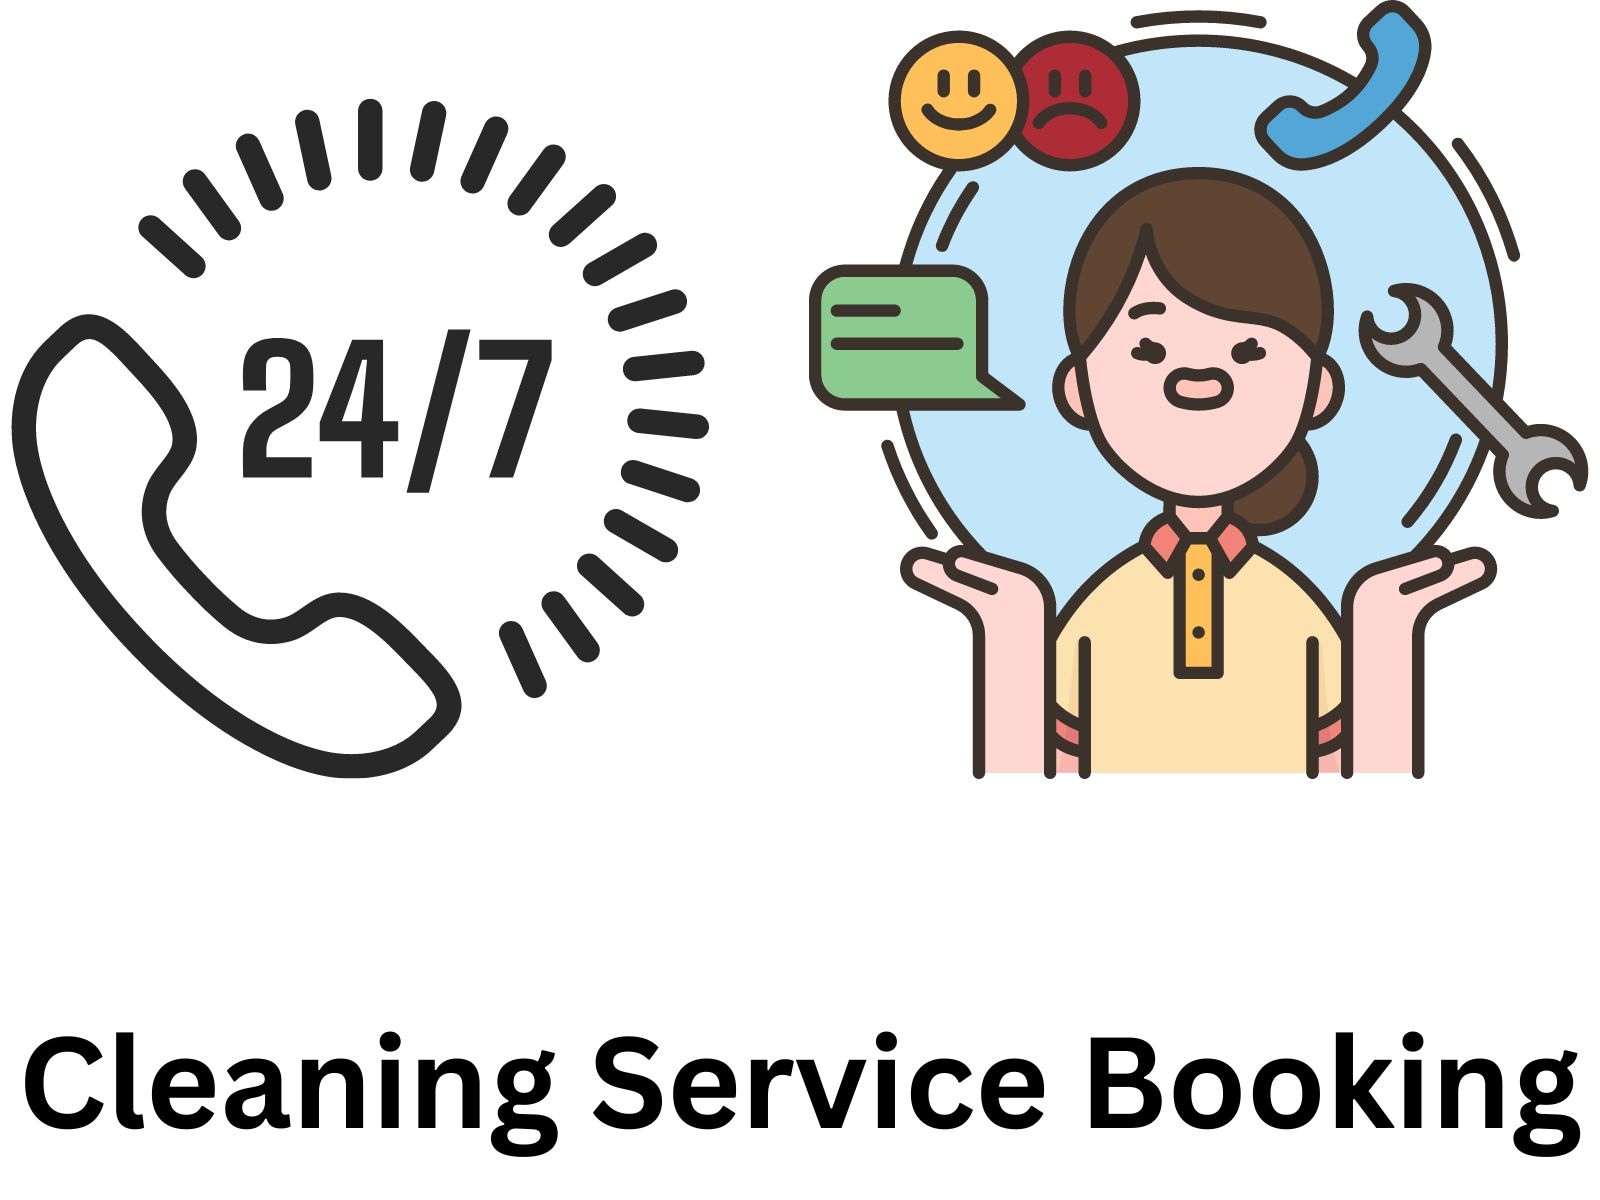 Cleaning Service Booking System in Python Tkinter